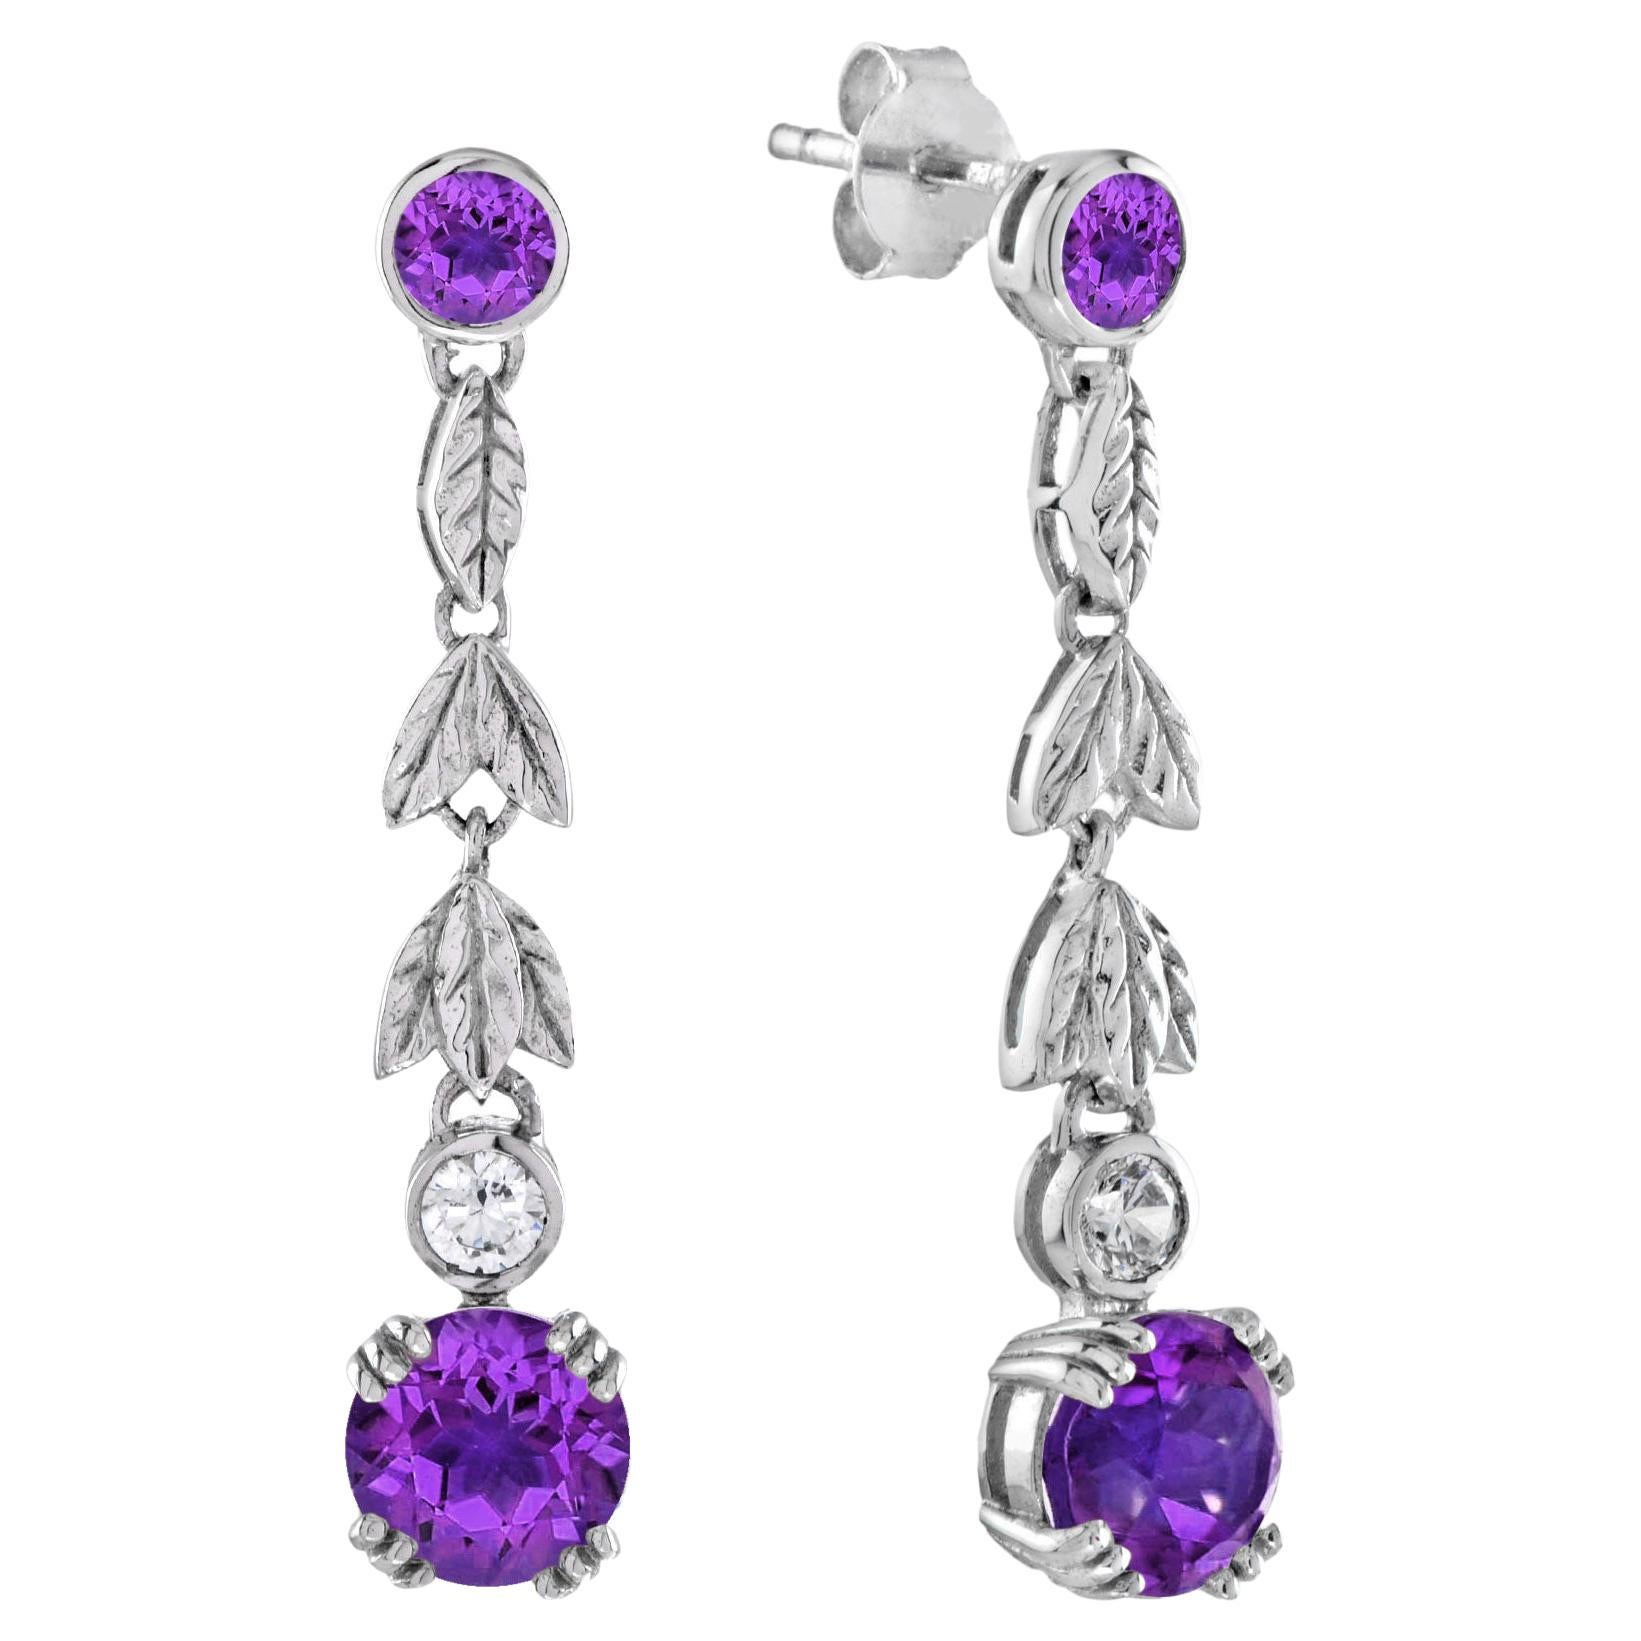 Amethyst and Diamond Floral Drop Earrings in 14K White Gold